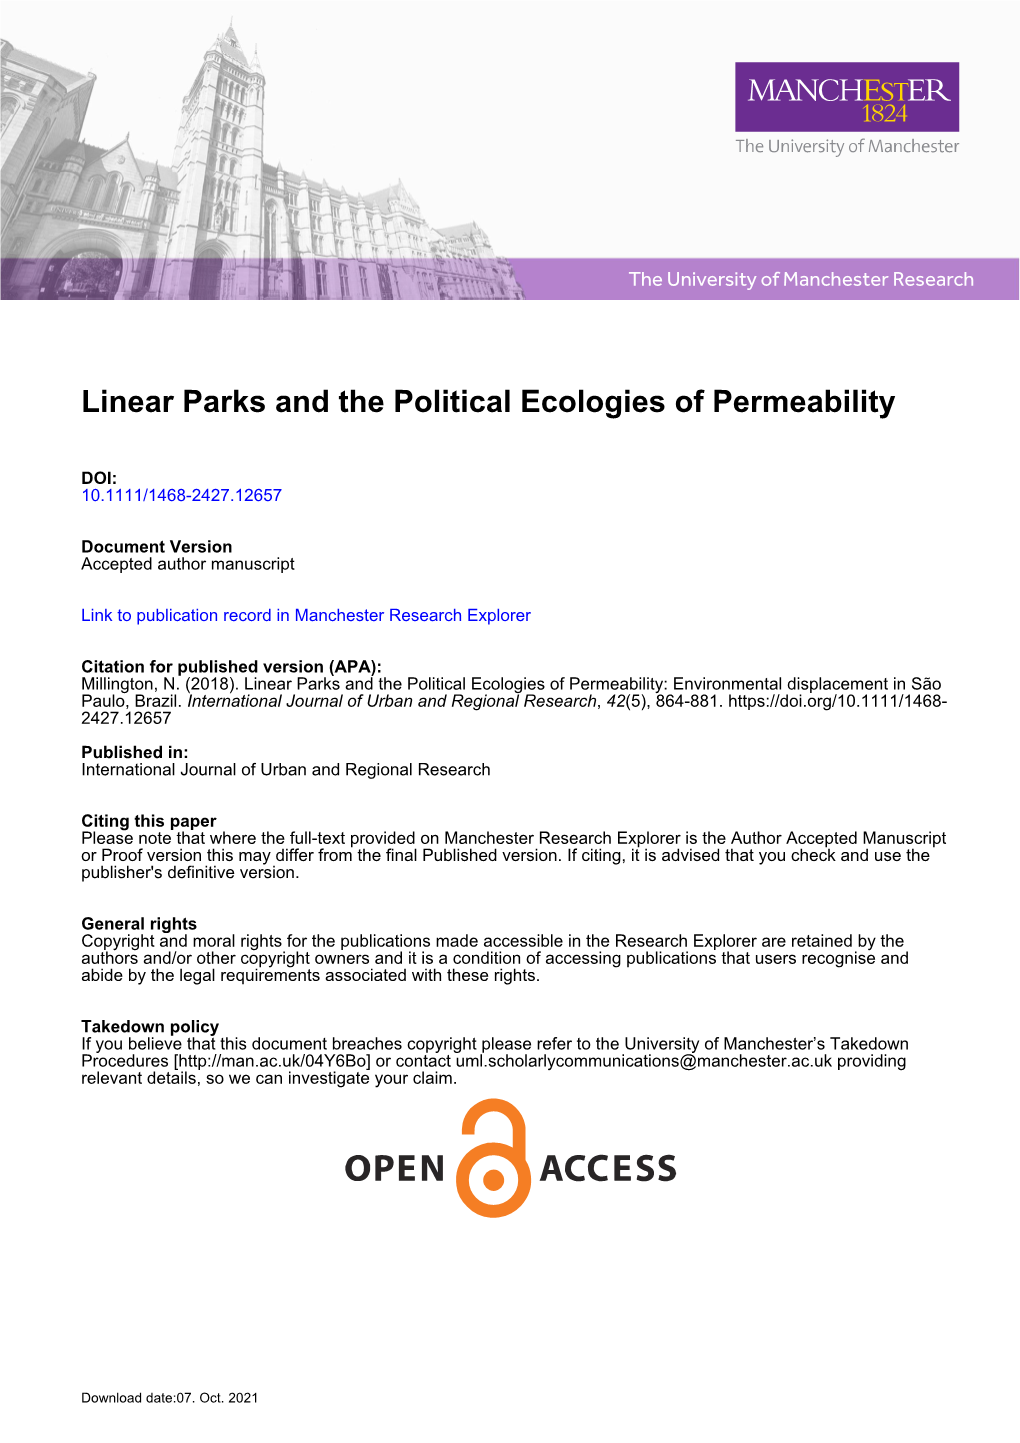 Linear Parks and the Political Ecologies of Permeability